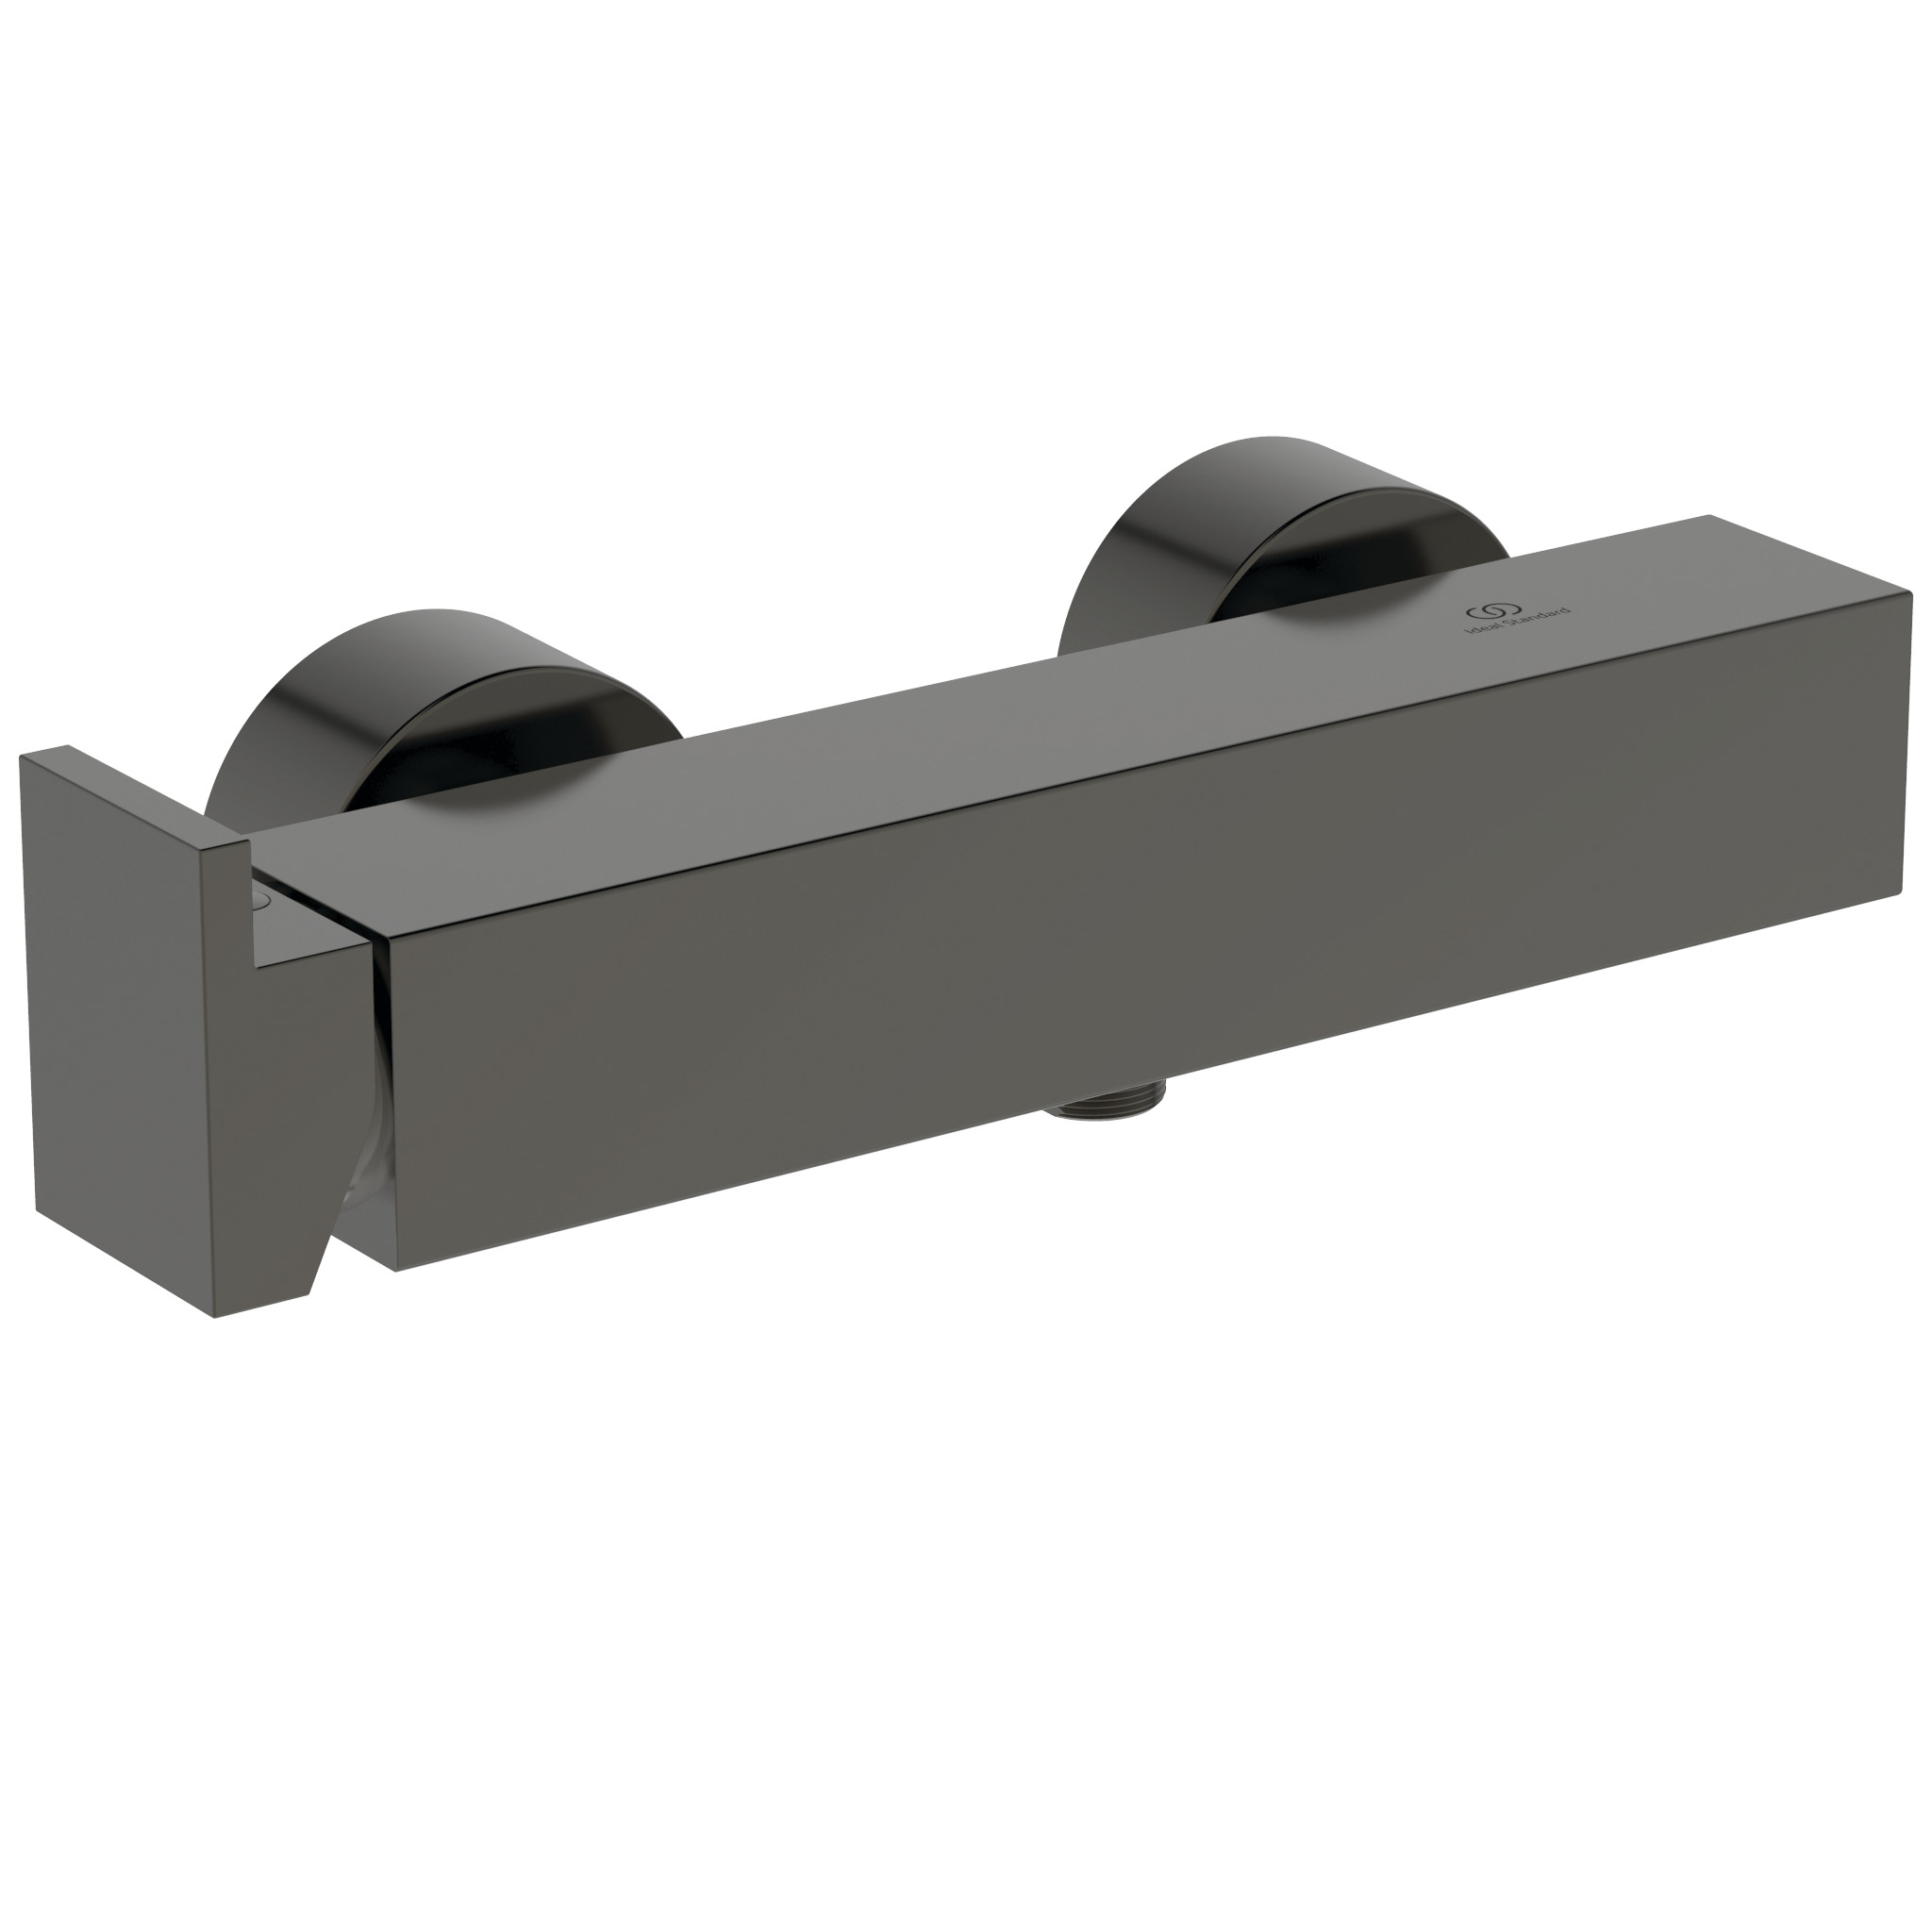 Baterie dus Ideal Standard Extra magnetic grey baie imagine bricosteel.ro